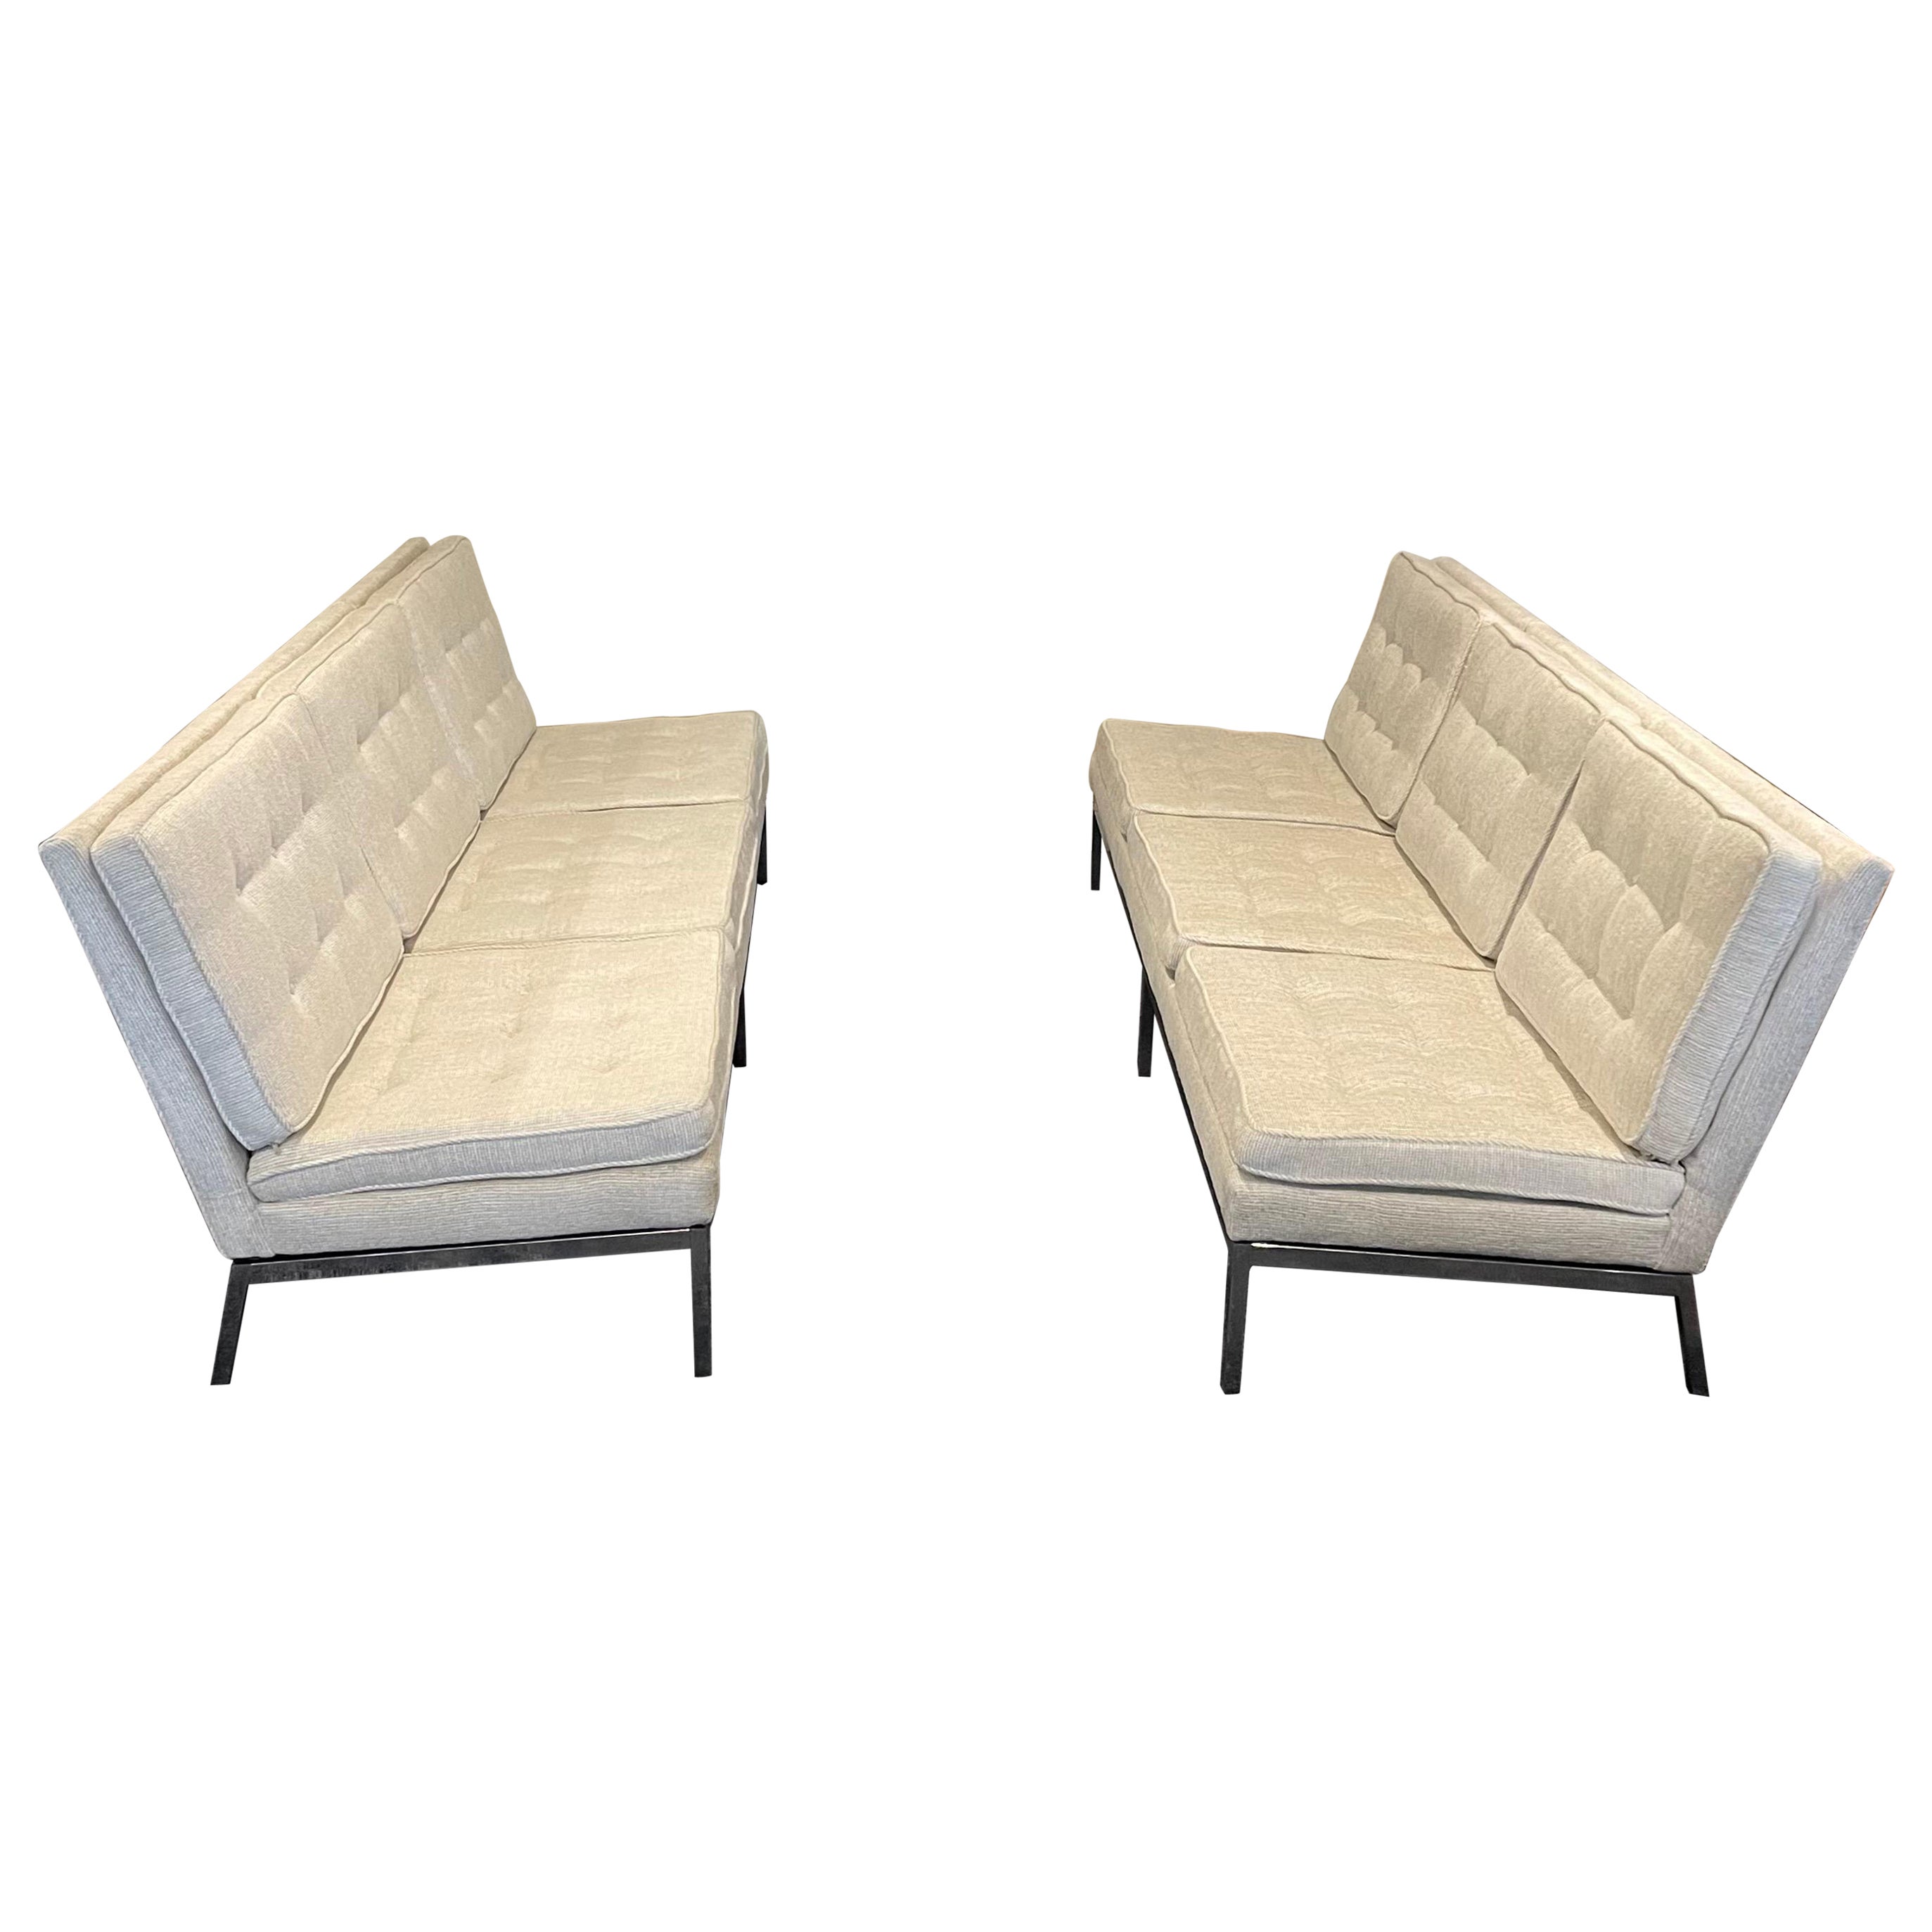 1960s Mid-Century Modern Florence Knoll Slipper Sofas- a Pair